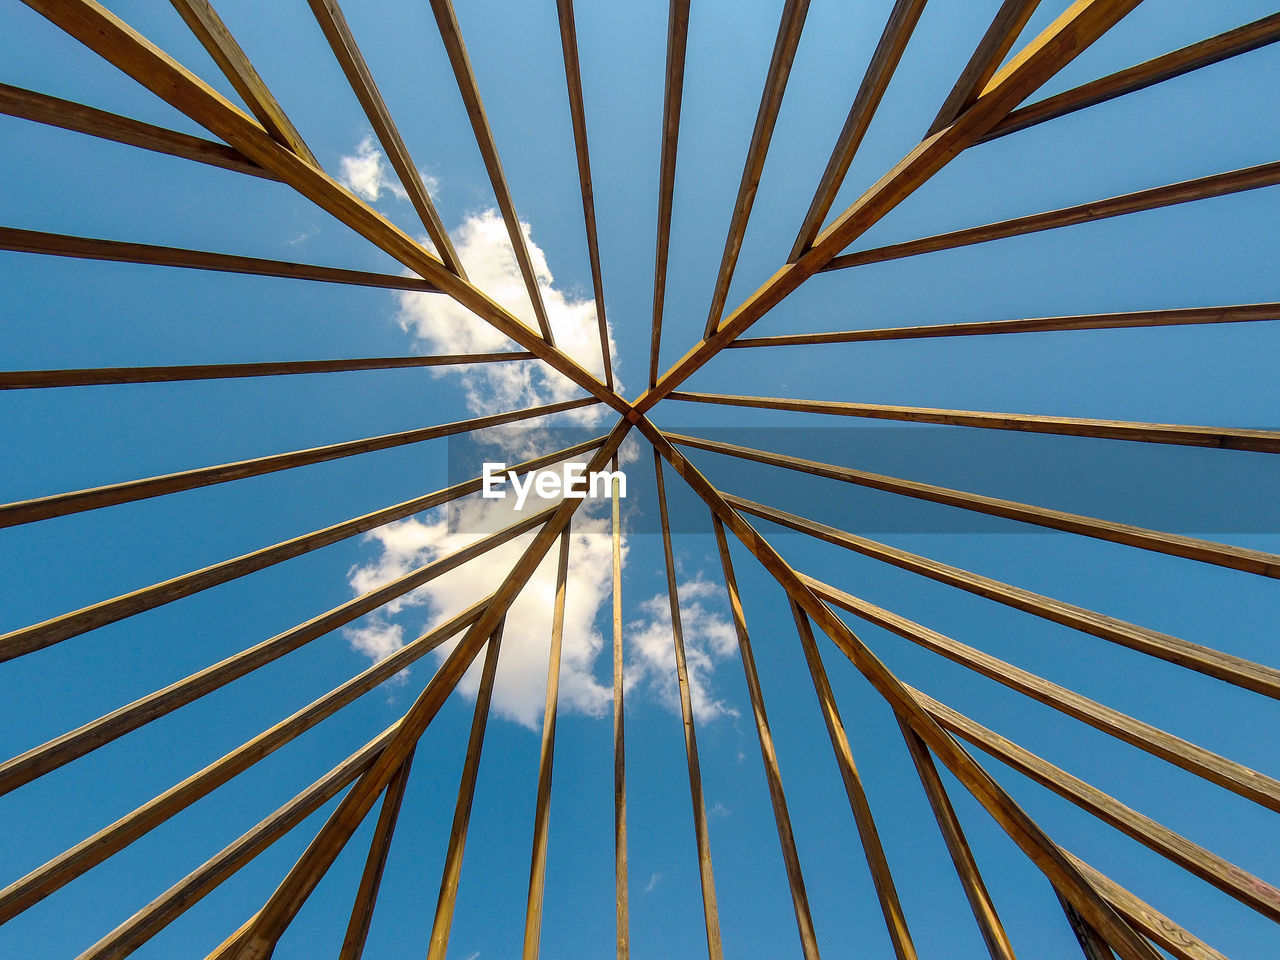 Wooden structure seen from below, with blue sky and small clouds on top.